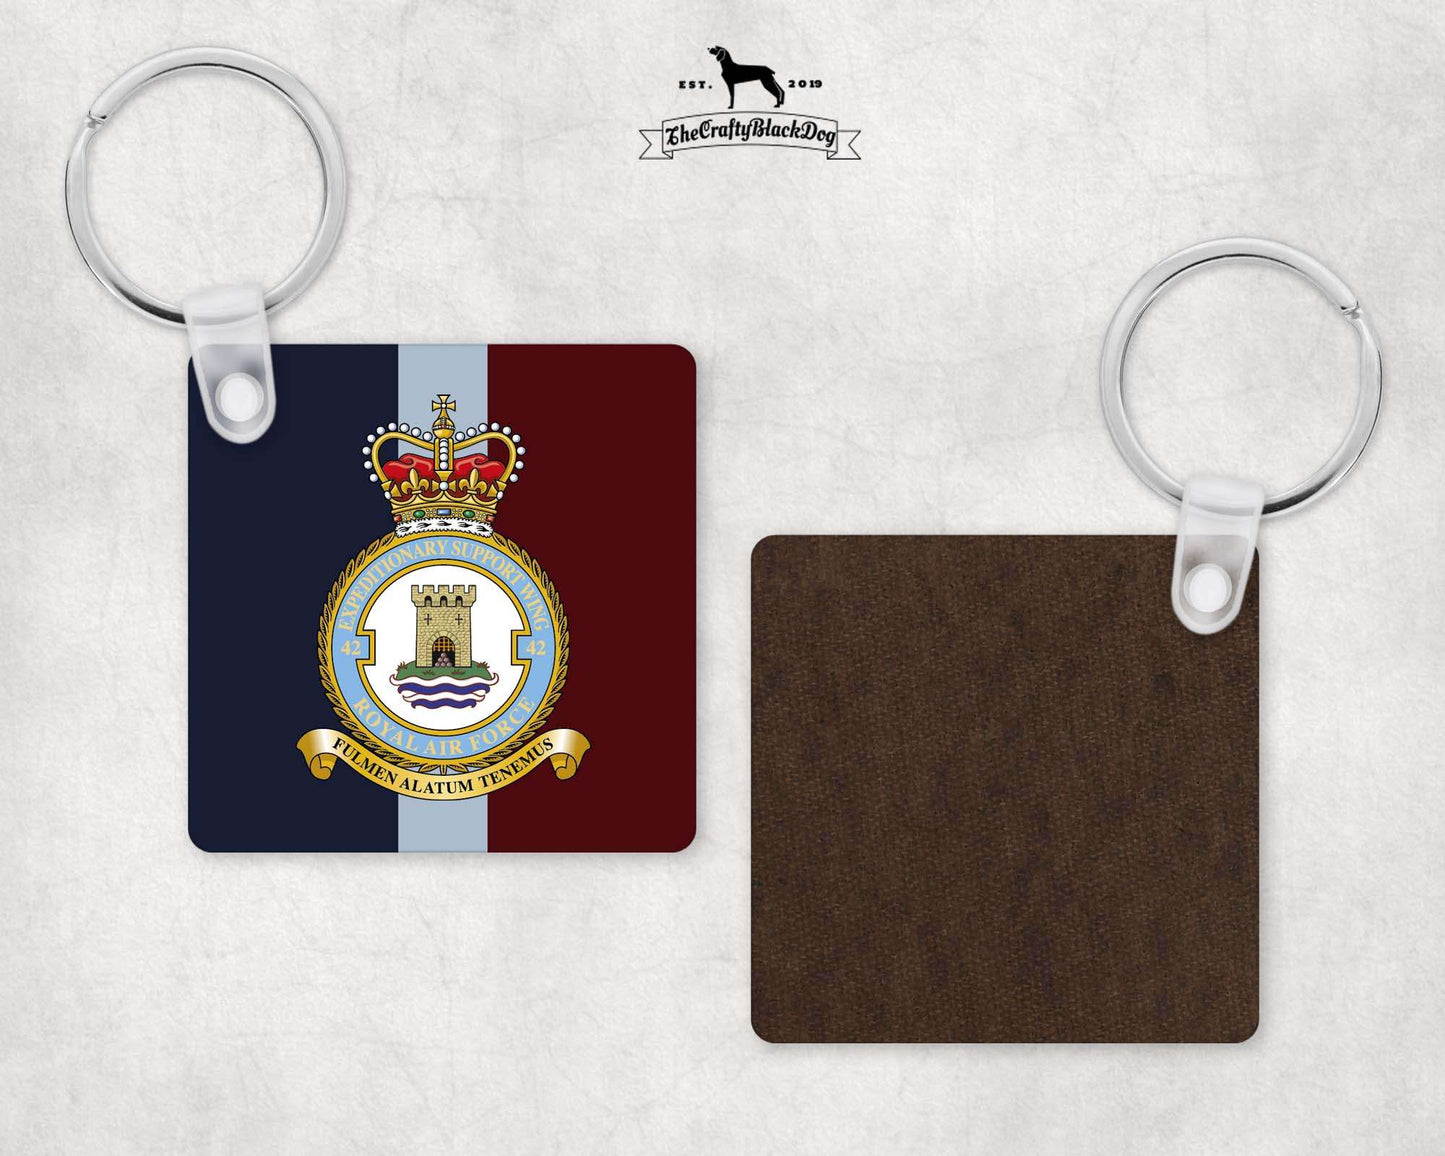 42 Expeditionary Support Wing RAF - Square Key Ring